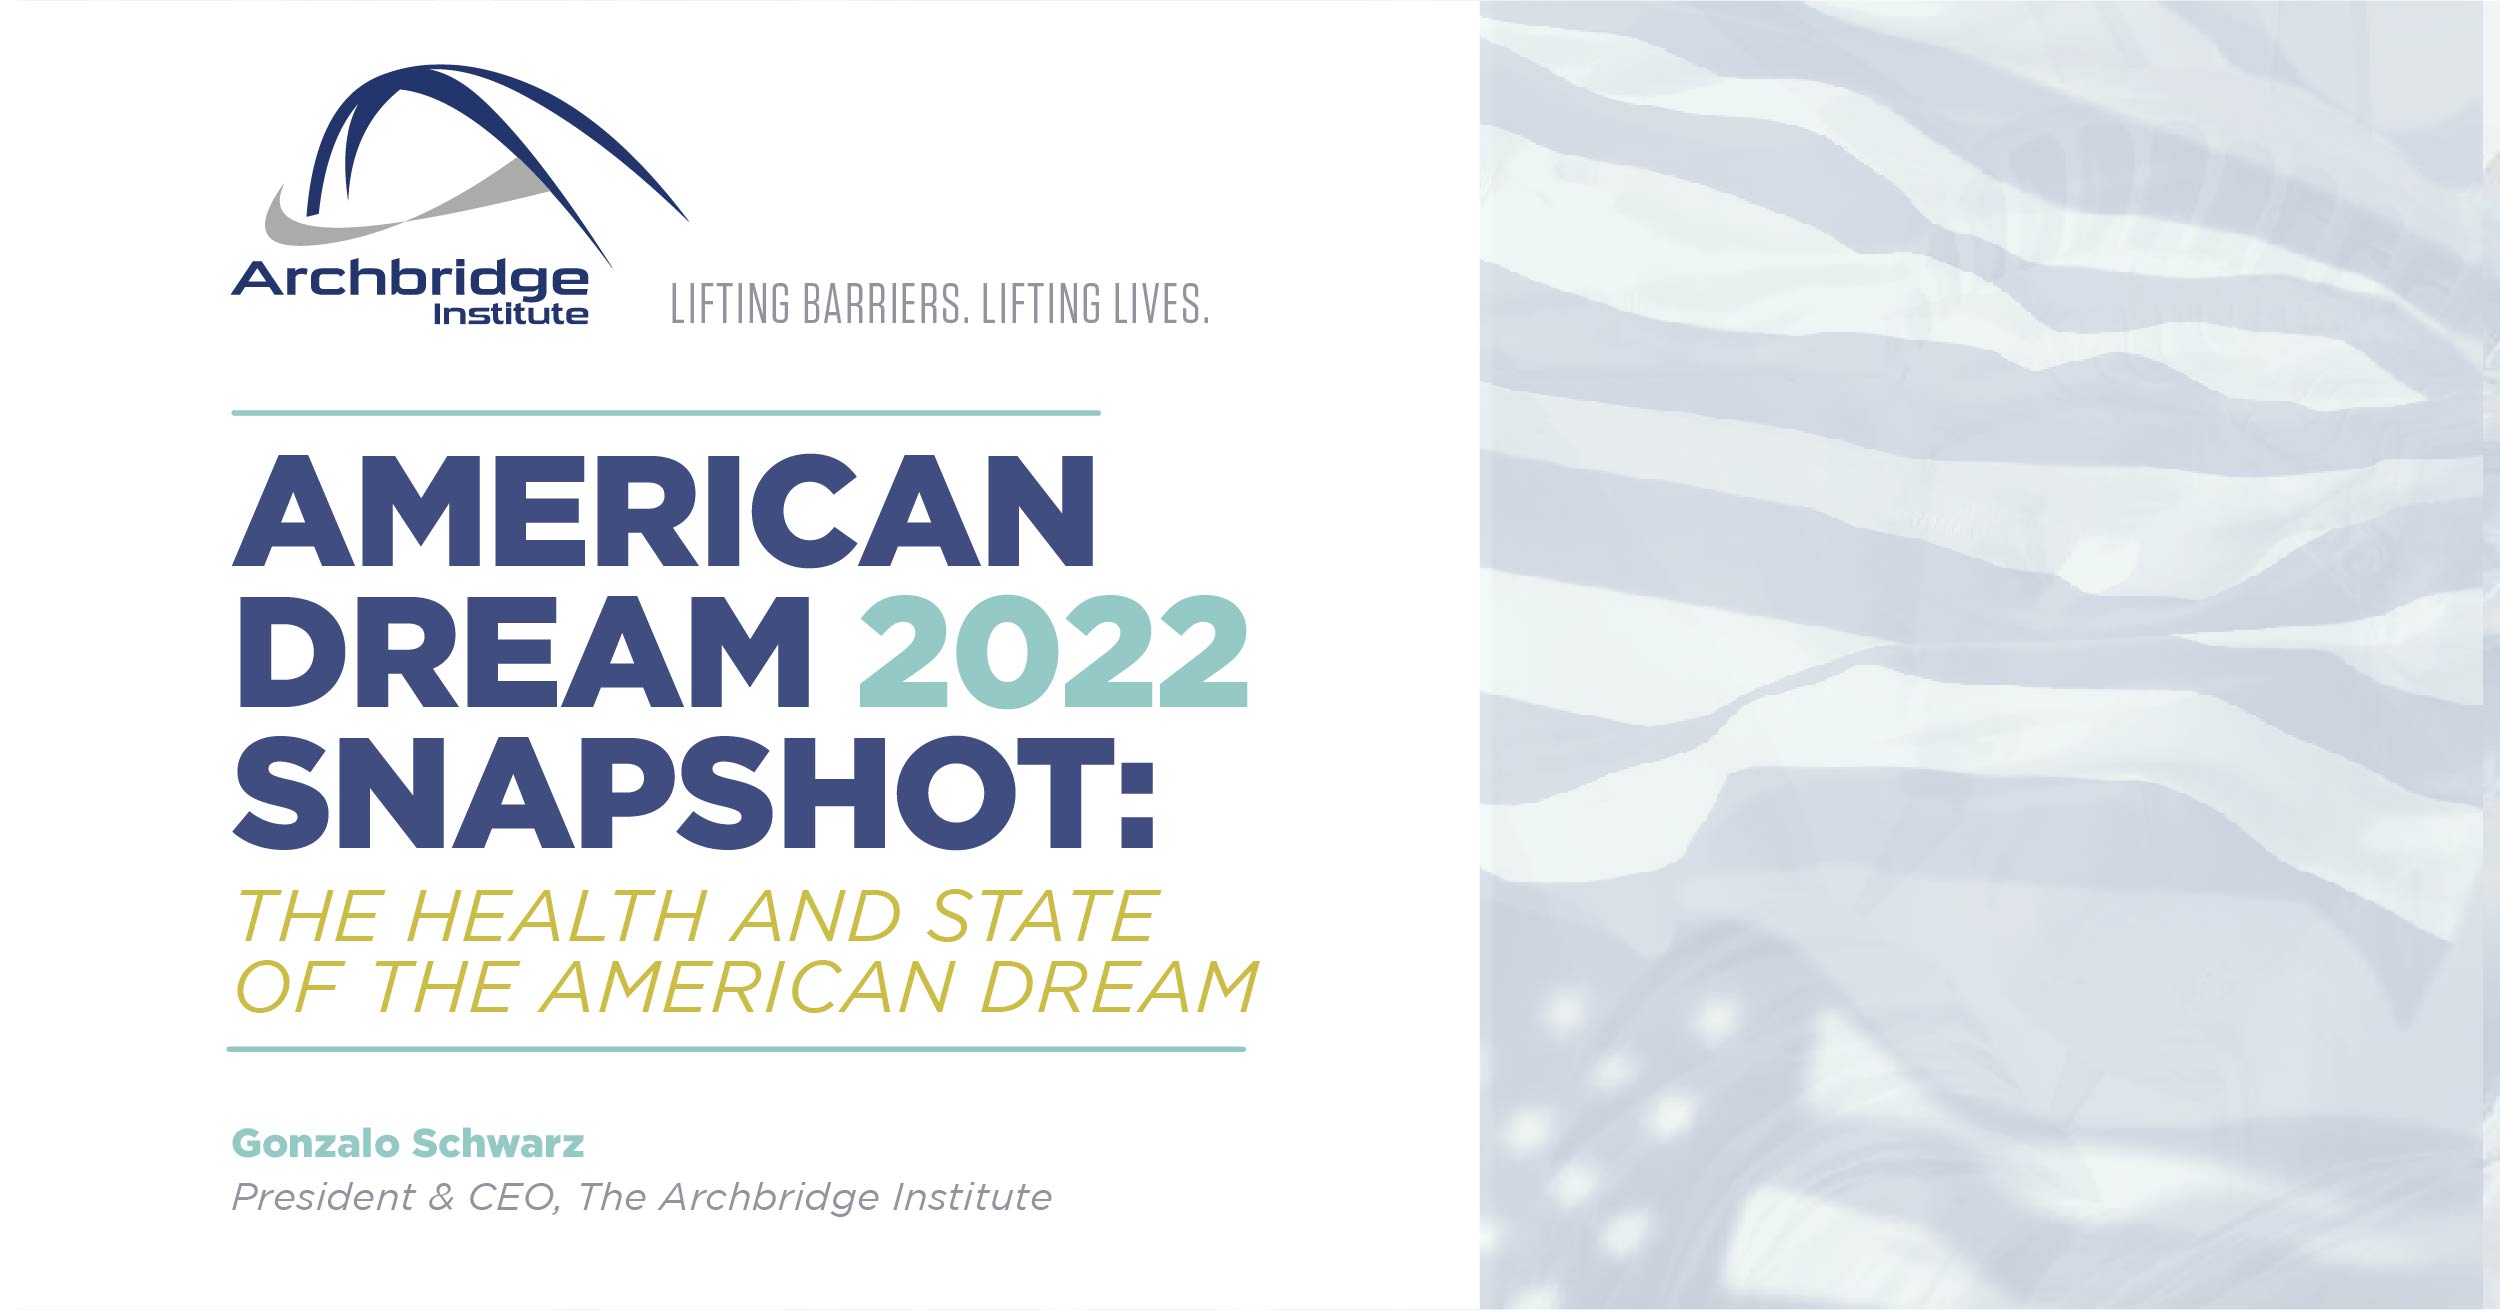 What the American dream means to Hispanic small business owners